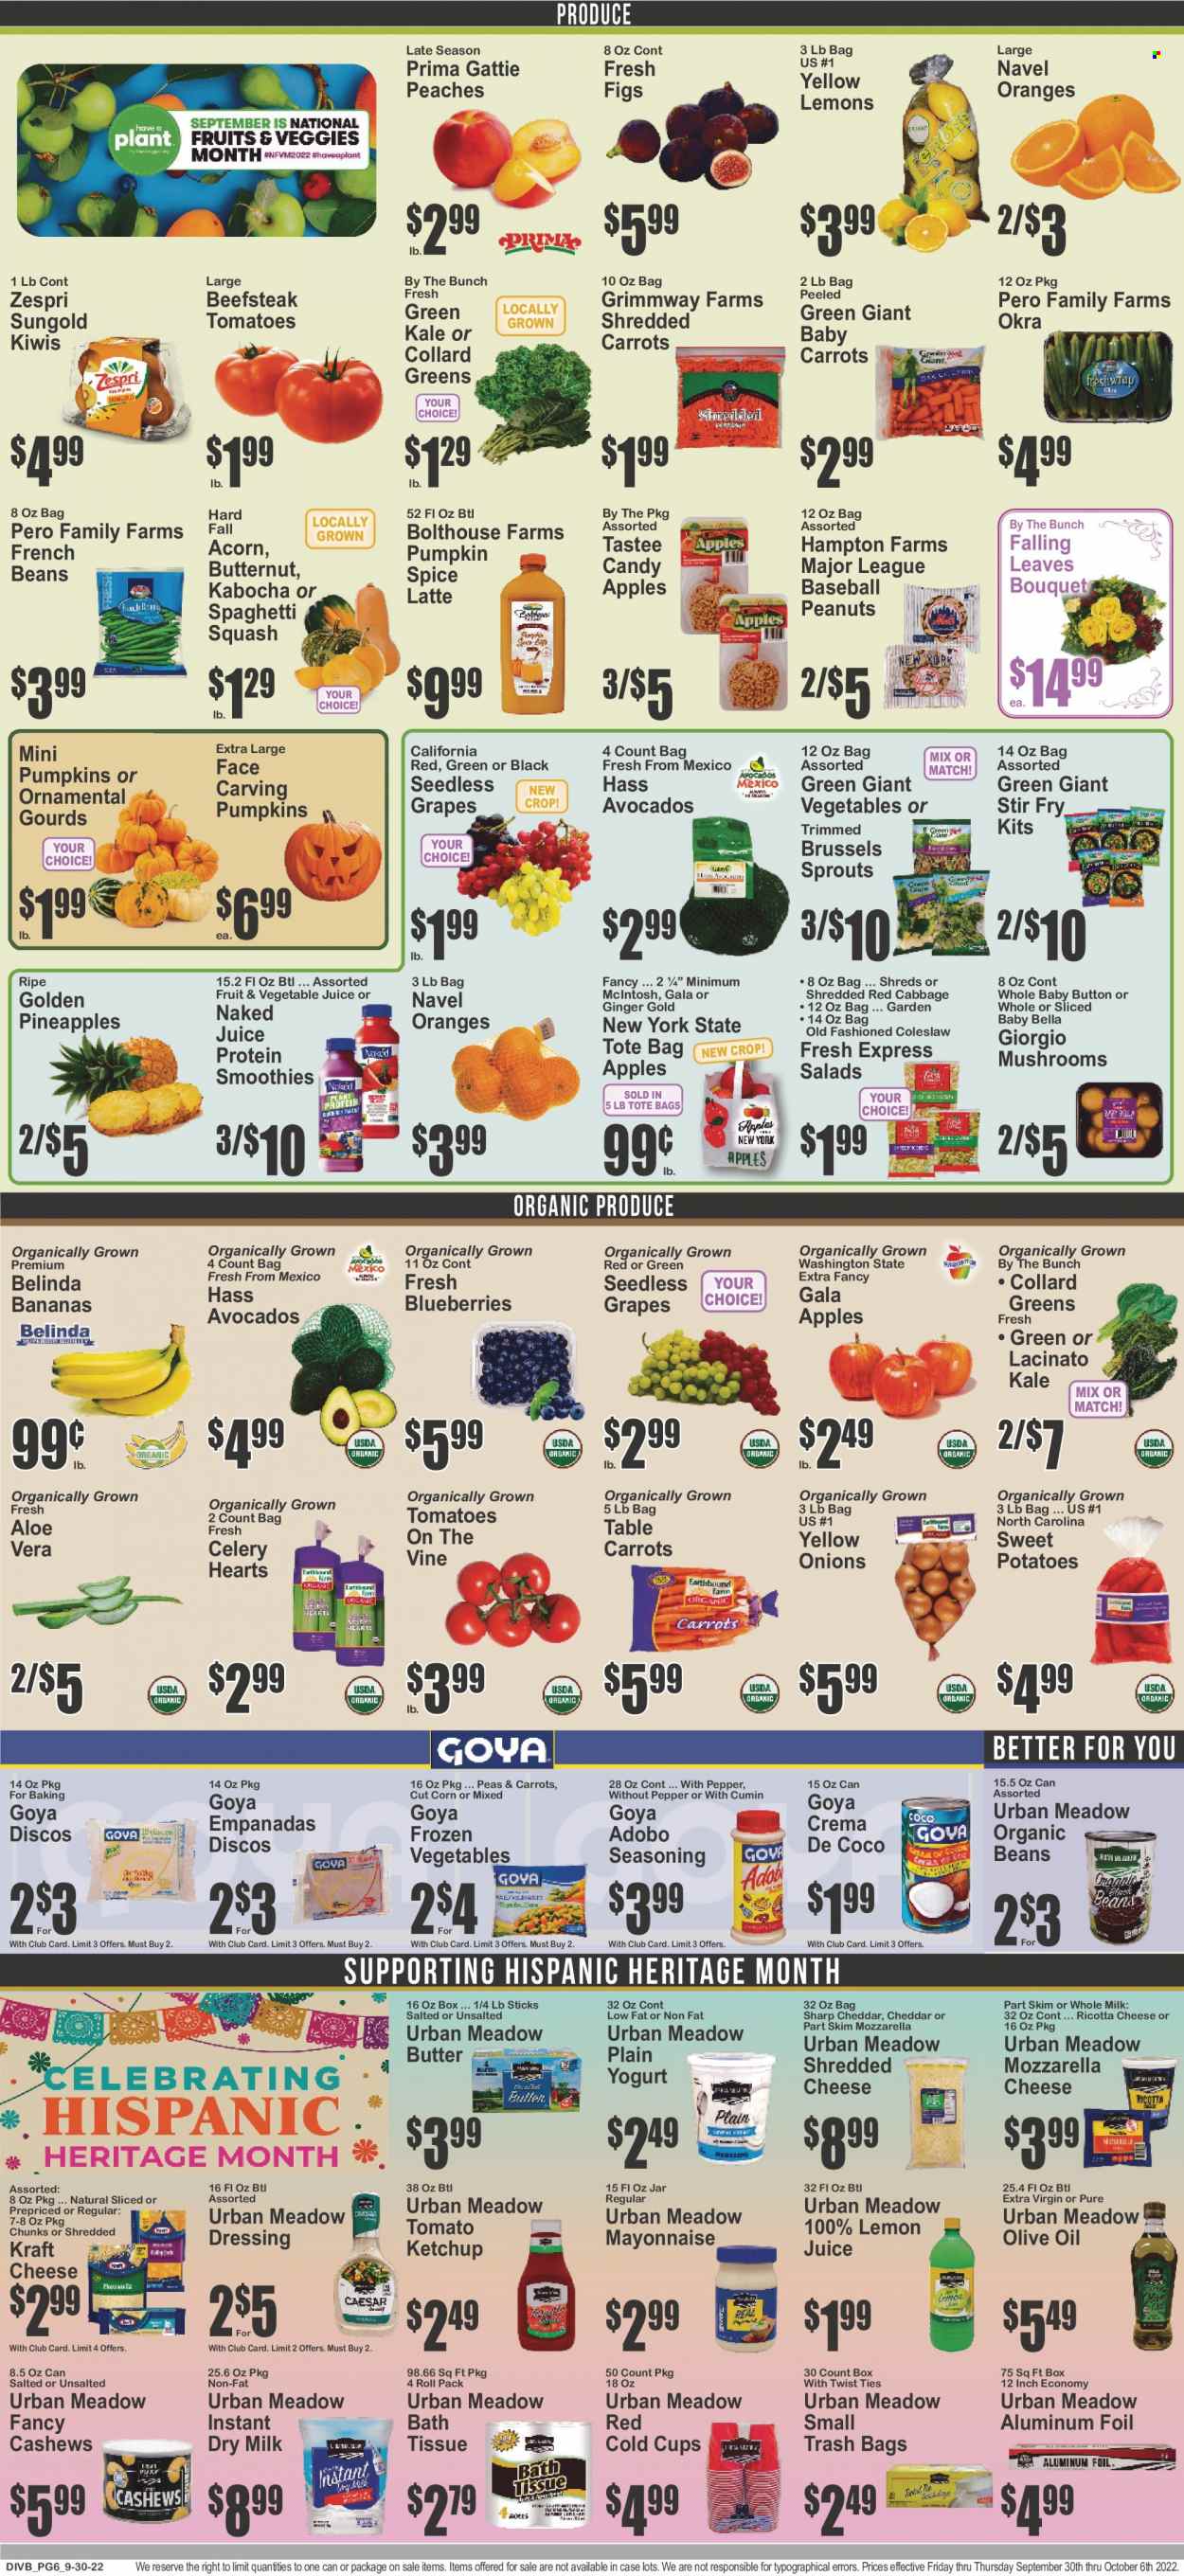 thumbnail - Food Dynasty Flyer - 09/30/2022 - 10/06/2022 - Sales products - mushrooms, beans, cabbage, celery, corn, collard greens, french beans, ginger, sweet potato, tomatoes, kale, potatoes, okra, onion, brussel sprouts, sleeved celery, apples, avocado, bananas, figs, Gala, grapes, kiwi, seedless grapes, pineapple, oranges, coleslaw, Kraft®, empanadas, mozzarella, ricotta, shredded cheese, cheddar, yoghurt, milk, butter, mayonnaise, frozen vegetables, Goya, spice, cumin, adobo sauce, ketchup, extra virgin olive oil, olive oil, cashews, peanuts, vegetable juice, smoothie, lemon juice, bath tissue, trash bags, cup, aluminium foil, tote, tote bag, bouquet, butternut squash, peaches, navel oranges. Page 6.